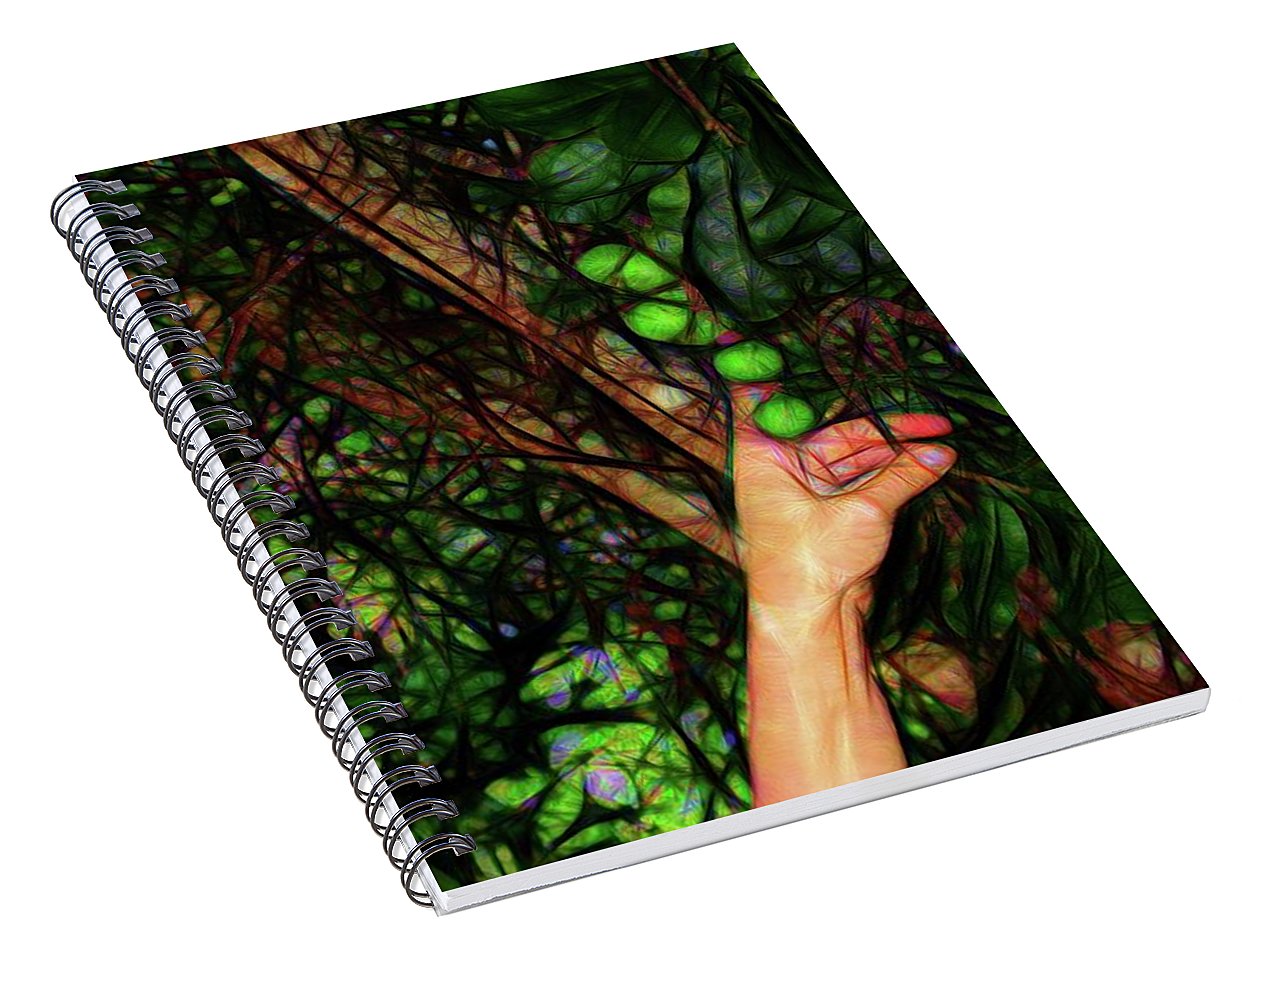 Pick The Limes - Spiral Notebook